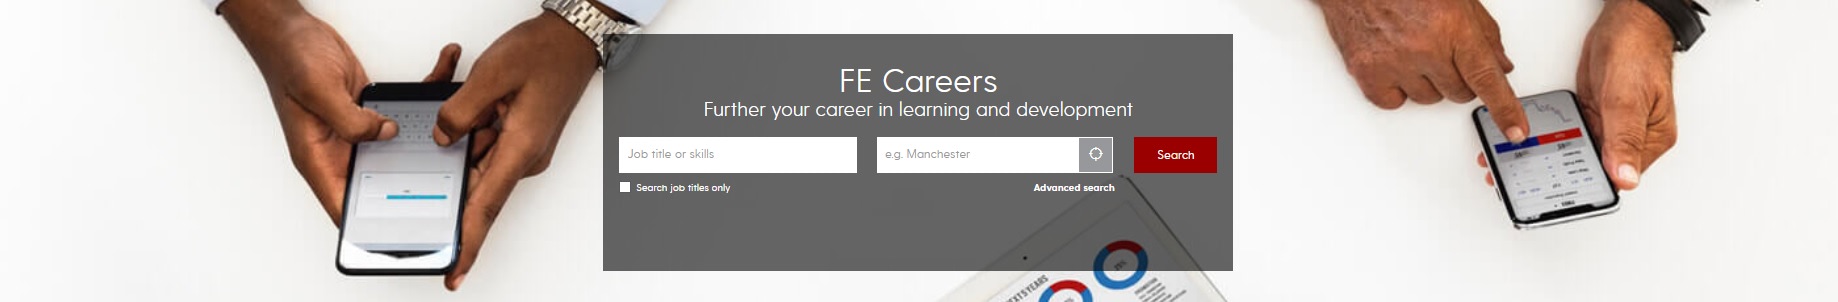 FE Careers Search Panel